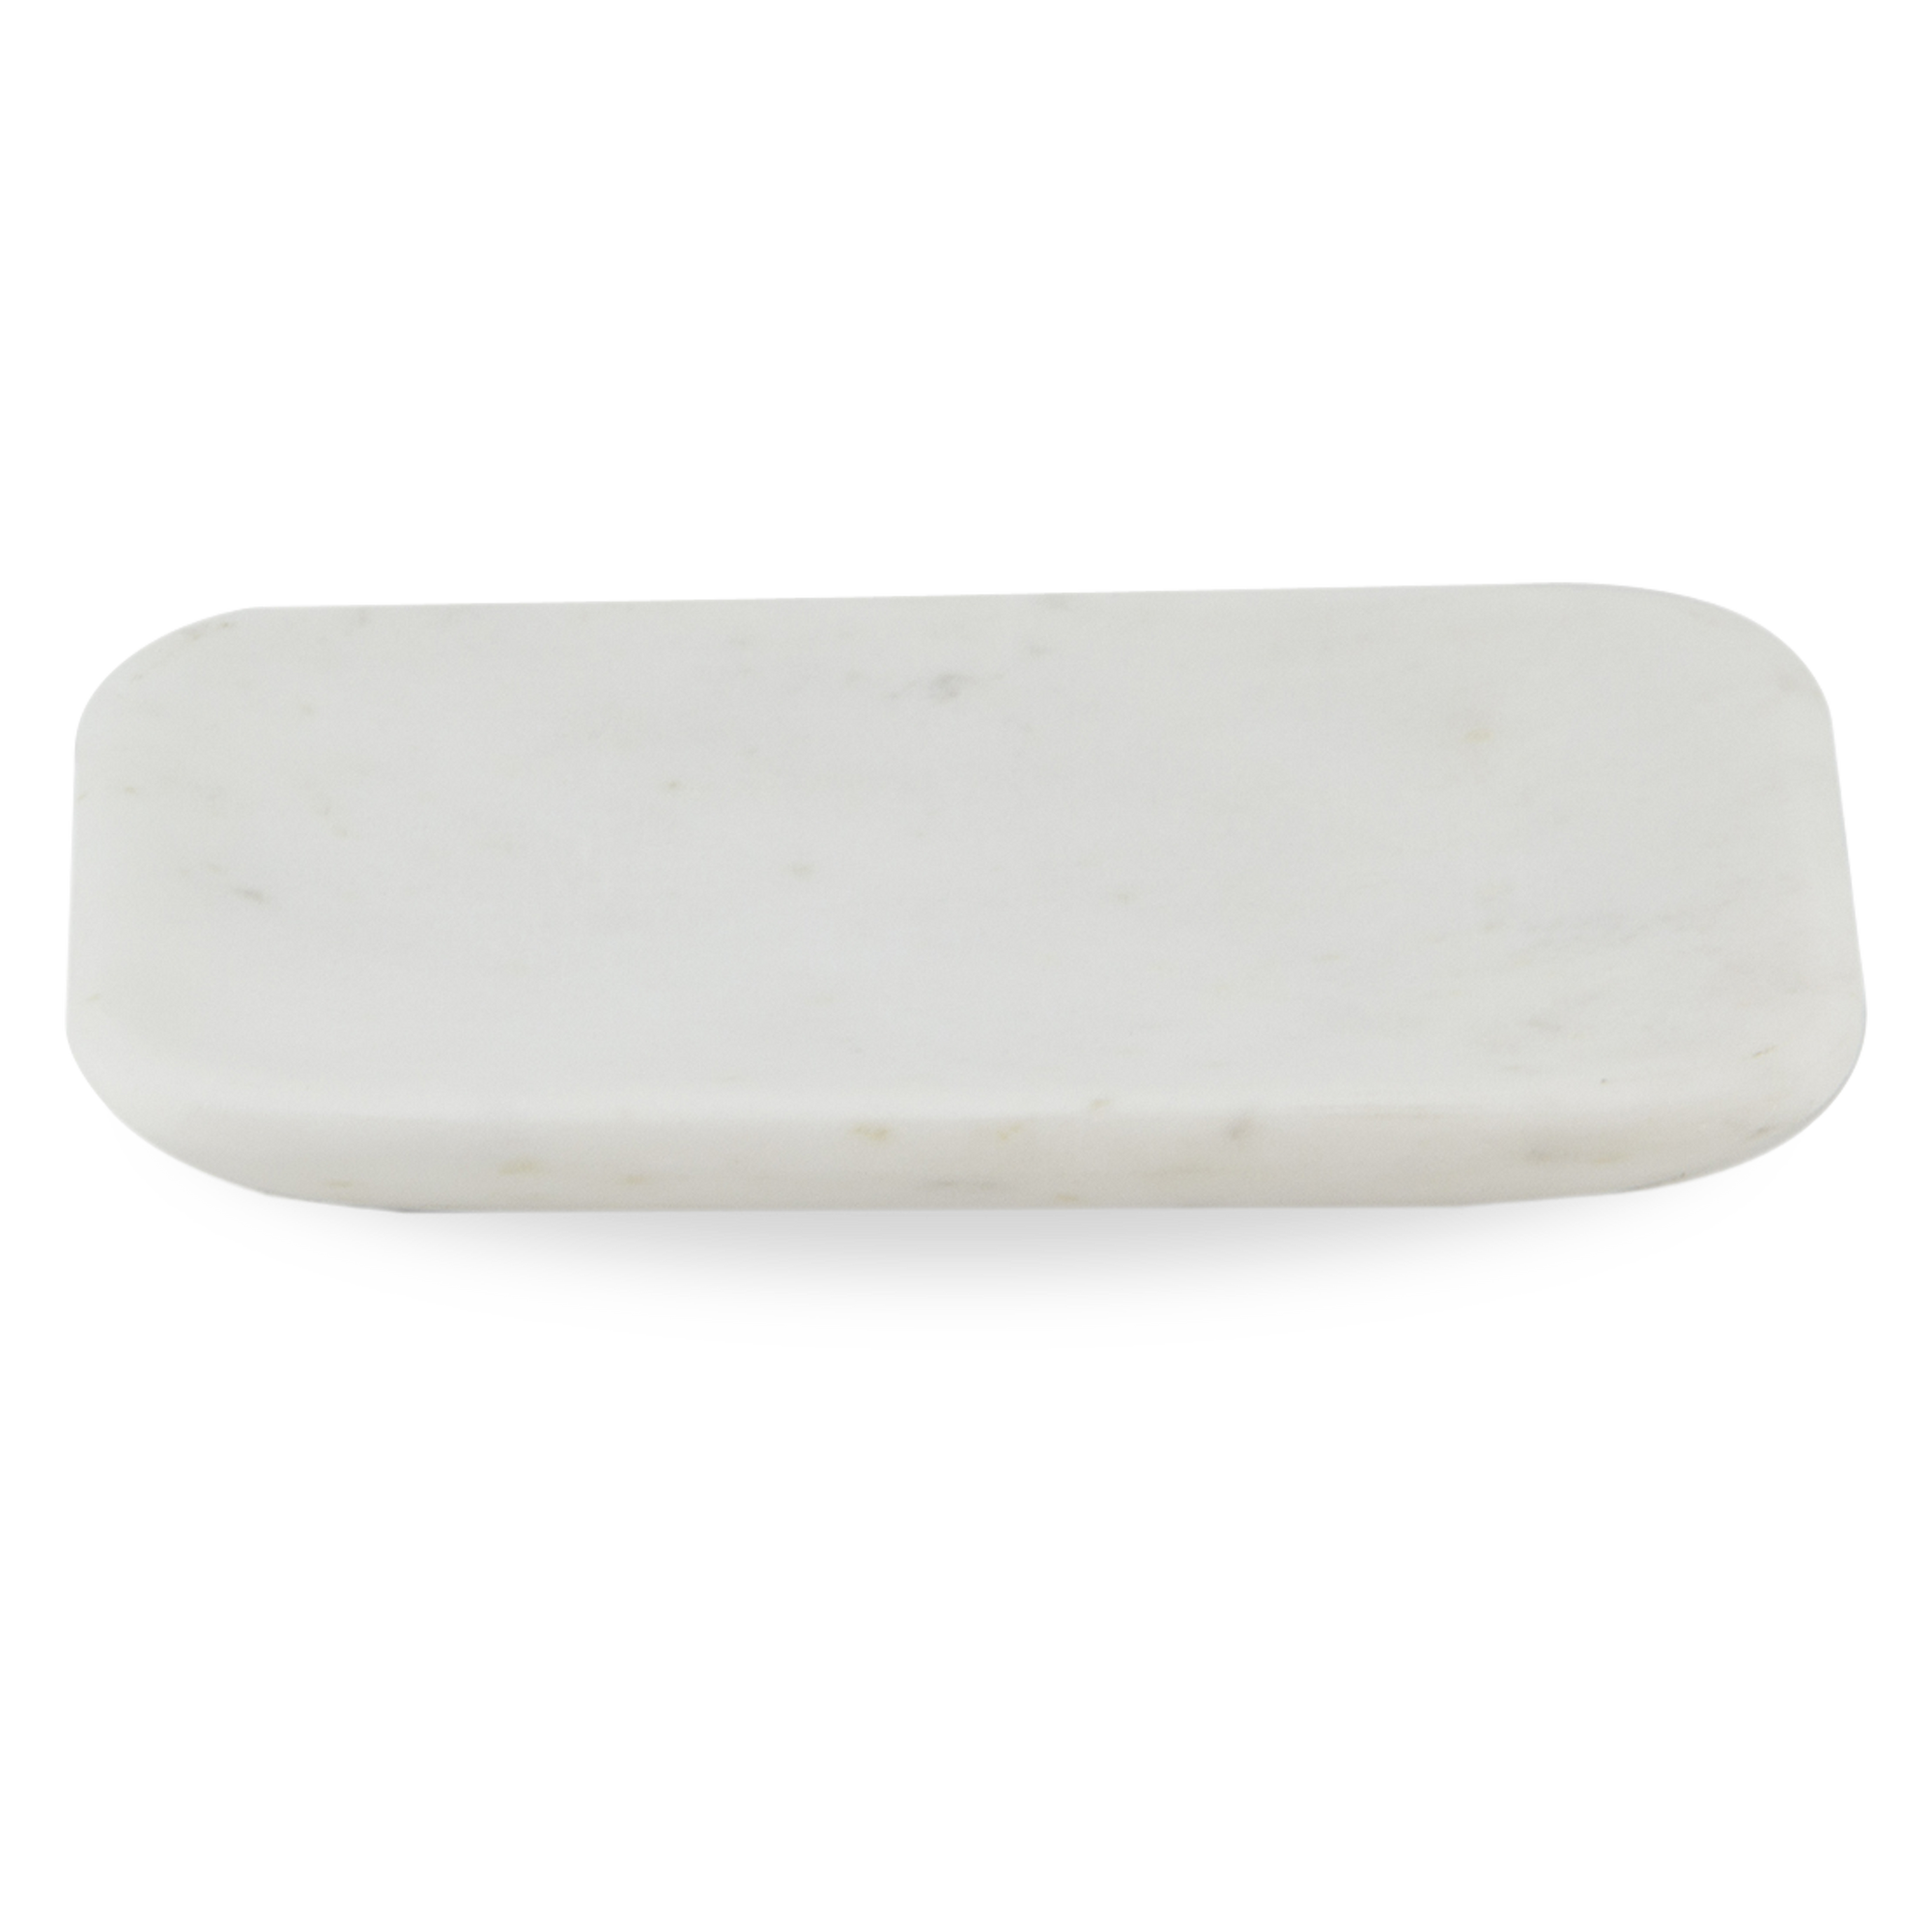 Beautifully handcrafted in India by skilled artisans, this soap dish is made from white marble with natural purple and grey veins.